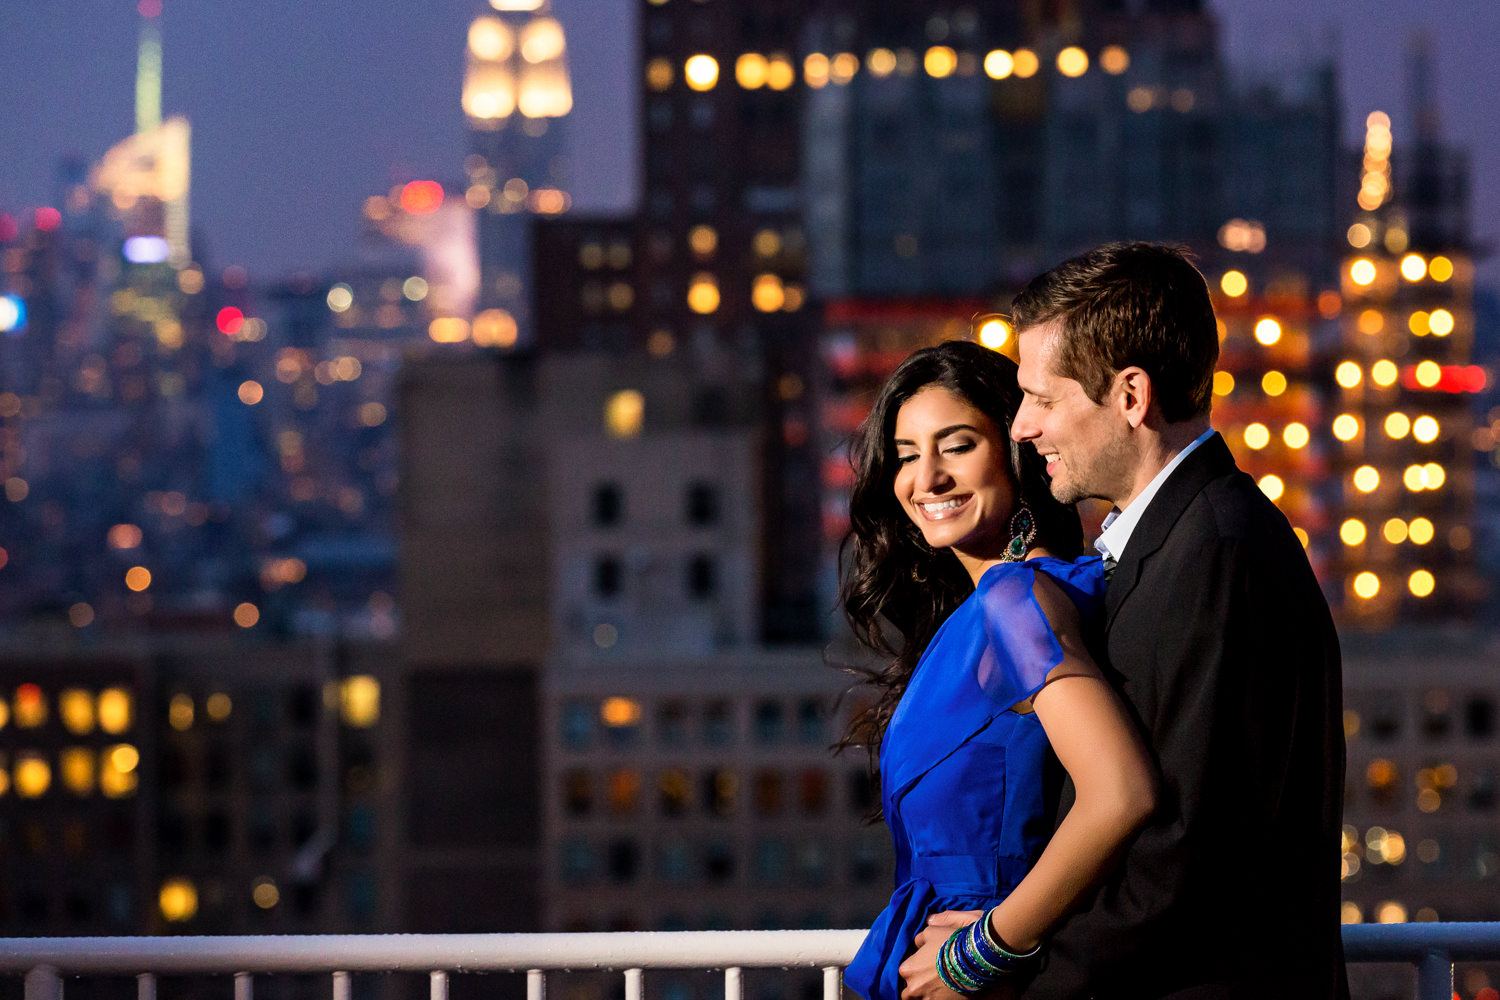 This was an engagement session in NYC, New York City, Manhattan, This shot is from the rooftop of the couple's apartment building at night, Indian bride, Jewish groom, Procopio Photography, best top Washington DC photographer, best top Maryland photographer, best top Virginia photographer, best top DMV photographer, best top wedding photographer, best top commercial photographer, best top portrait photographer, best top boudoir photographer, modern fine art portraits, dramatic, unique, different, bold, editorial, photojournalism, award winning photographer, published photographer, memorable images, be different, stand out, engagement photography